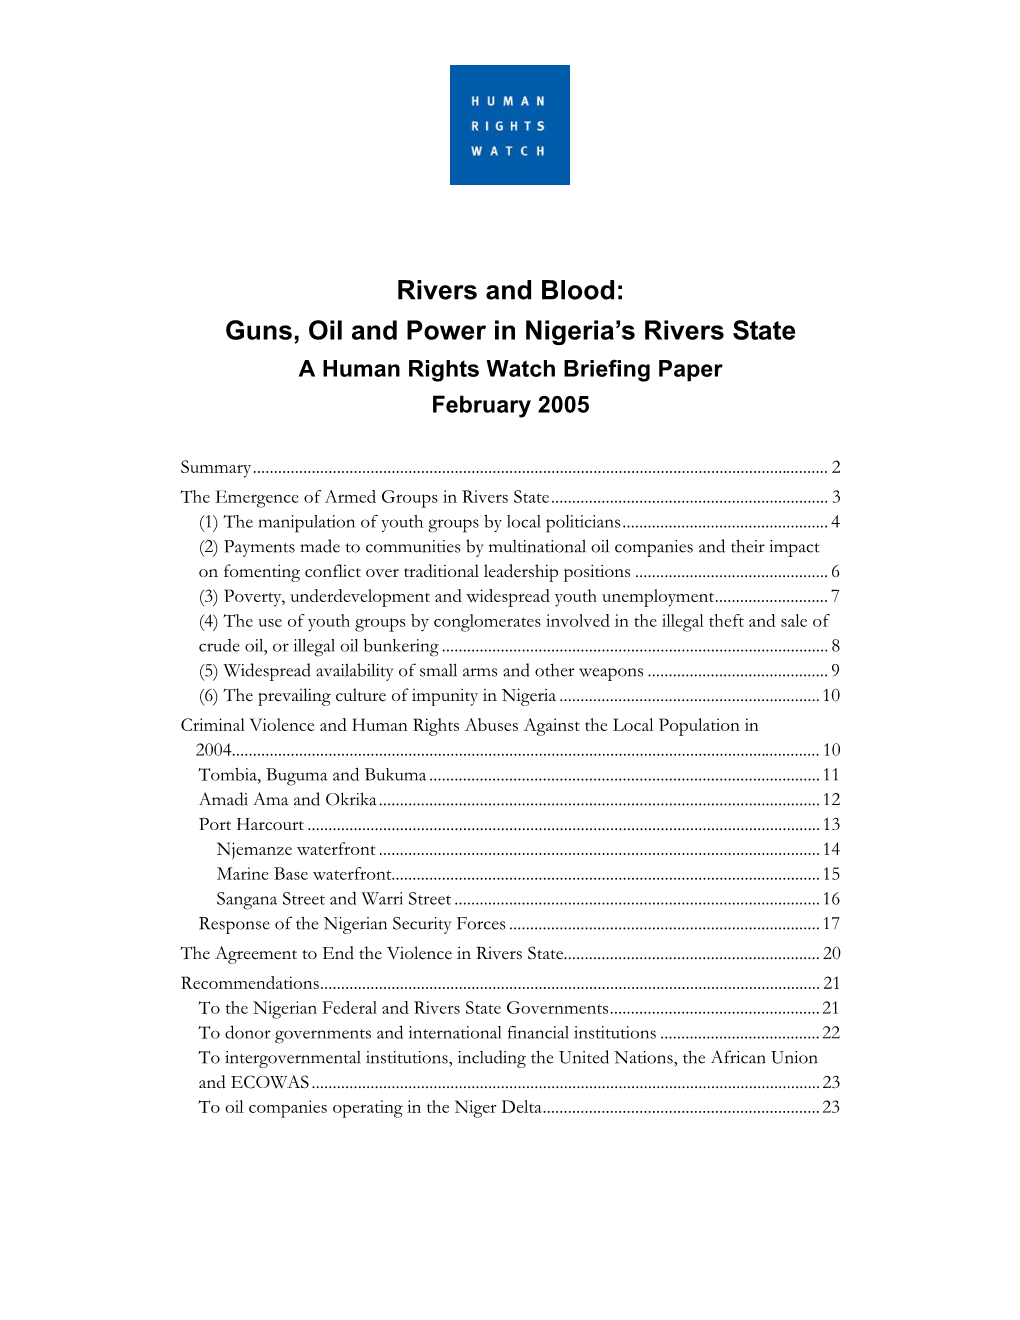 Guns, Oil and Power in Nigeria's Rivers State